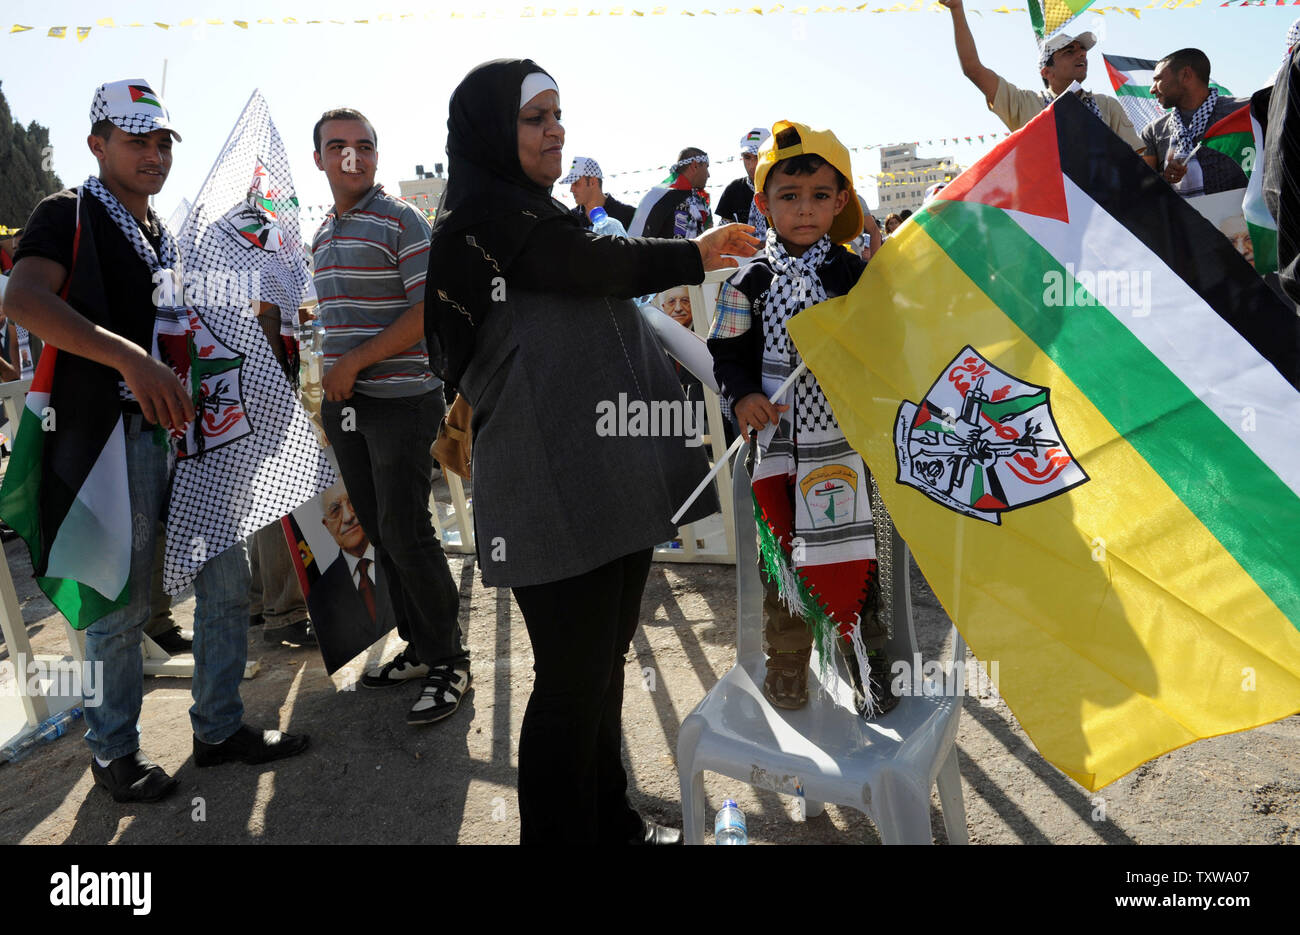 A Palestinian boy holds the Fatah Flag at a rally in the Palestinian Authority's headquarters in Ramallah, West Bank, commemorating the sixth anniversary of the death of Palestinian leader Yasser Arafat, November 11, 2010. Thousands of Palestinians gathered from the West Bank to show support for President Abbas and his Fatah Party. In the Gaza Strip, Hamas police banned Fatah supporters from holding a rally to mark the anniversary of Arafat's death.  - UPI/Debbie Hill Stock Photo